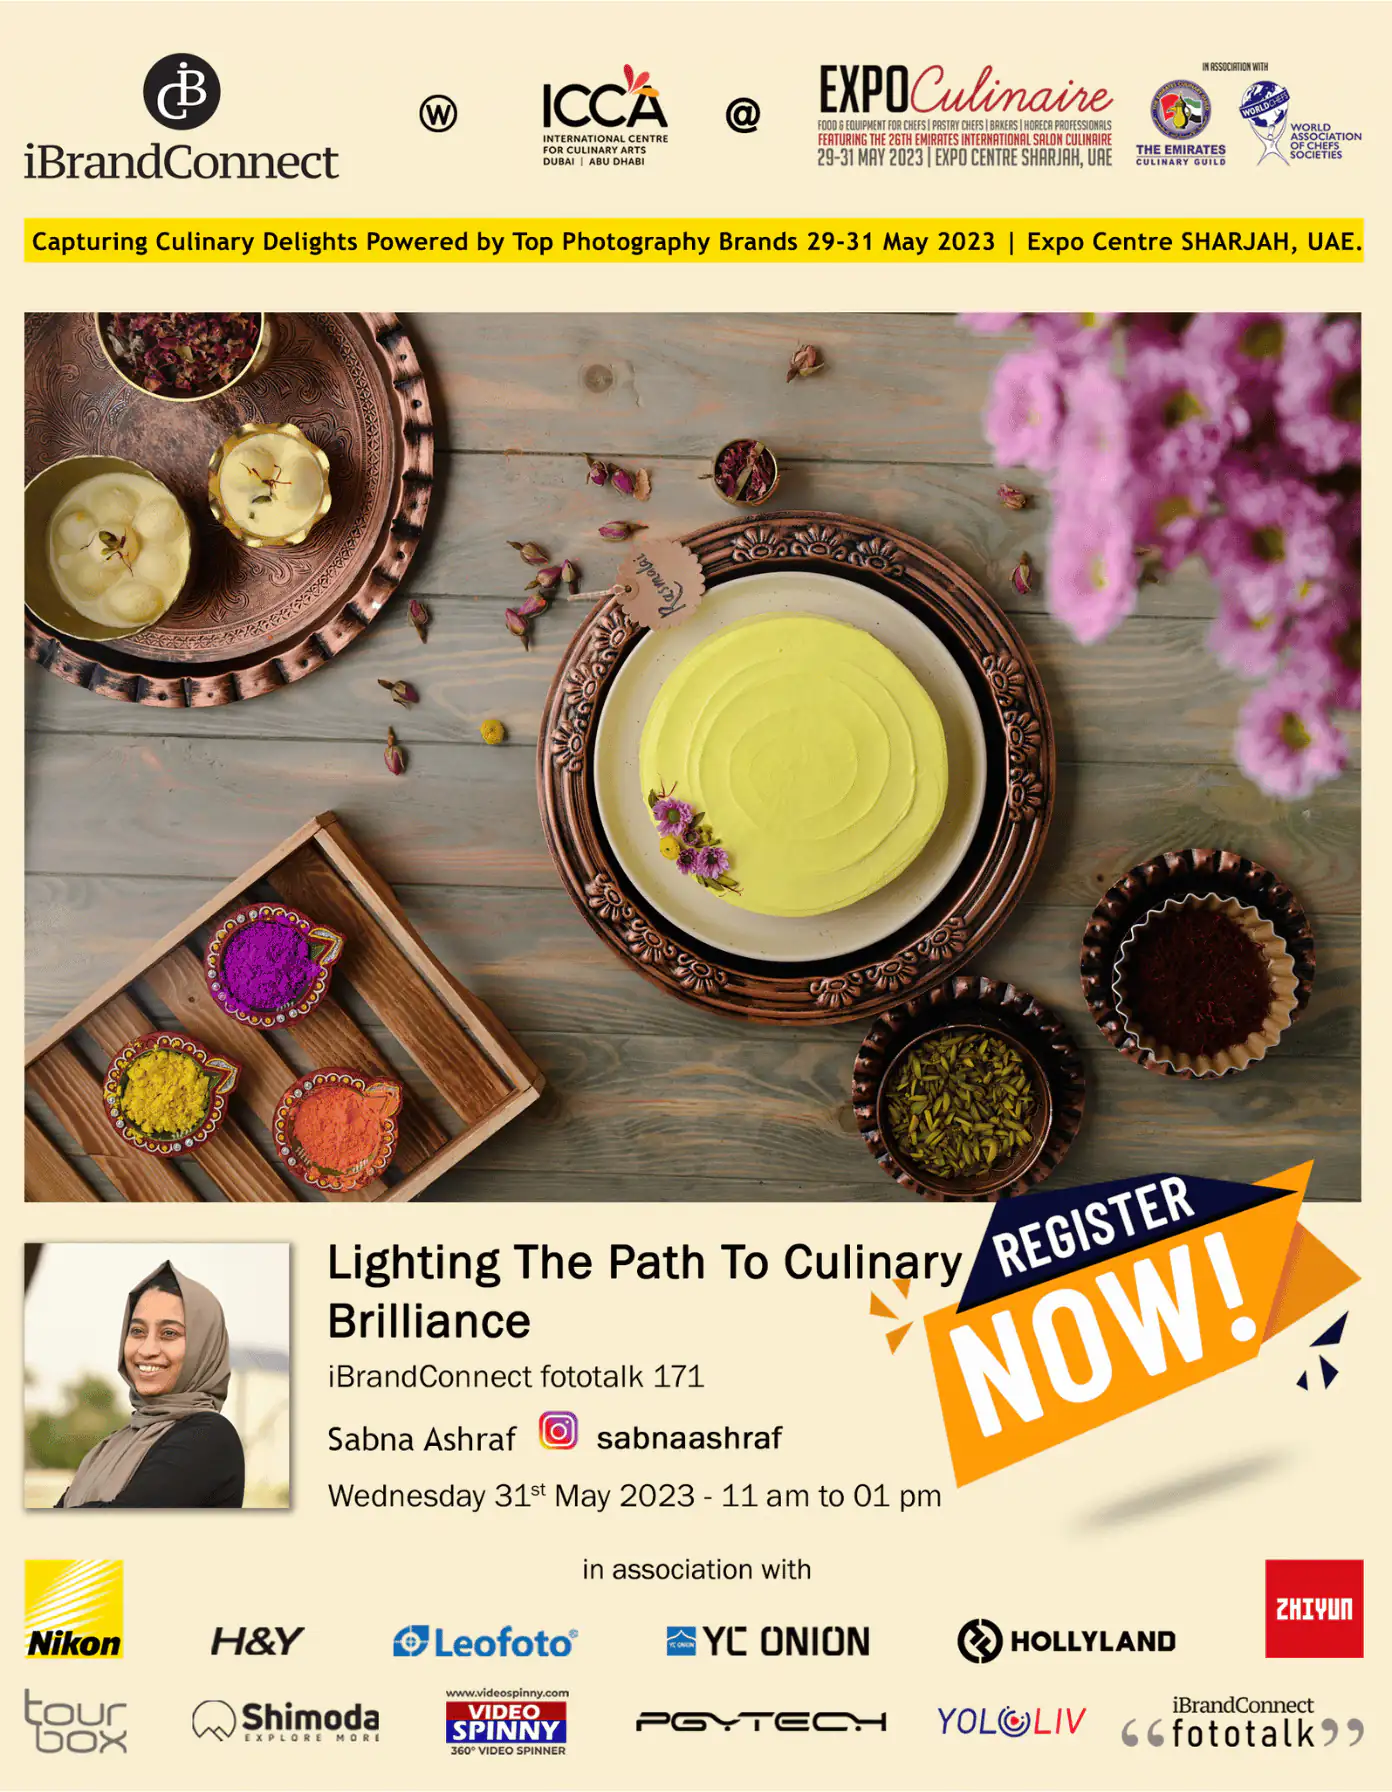 Lighting the Path to Culinary Brilliance